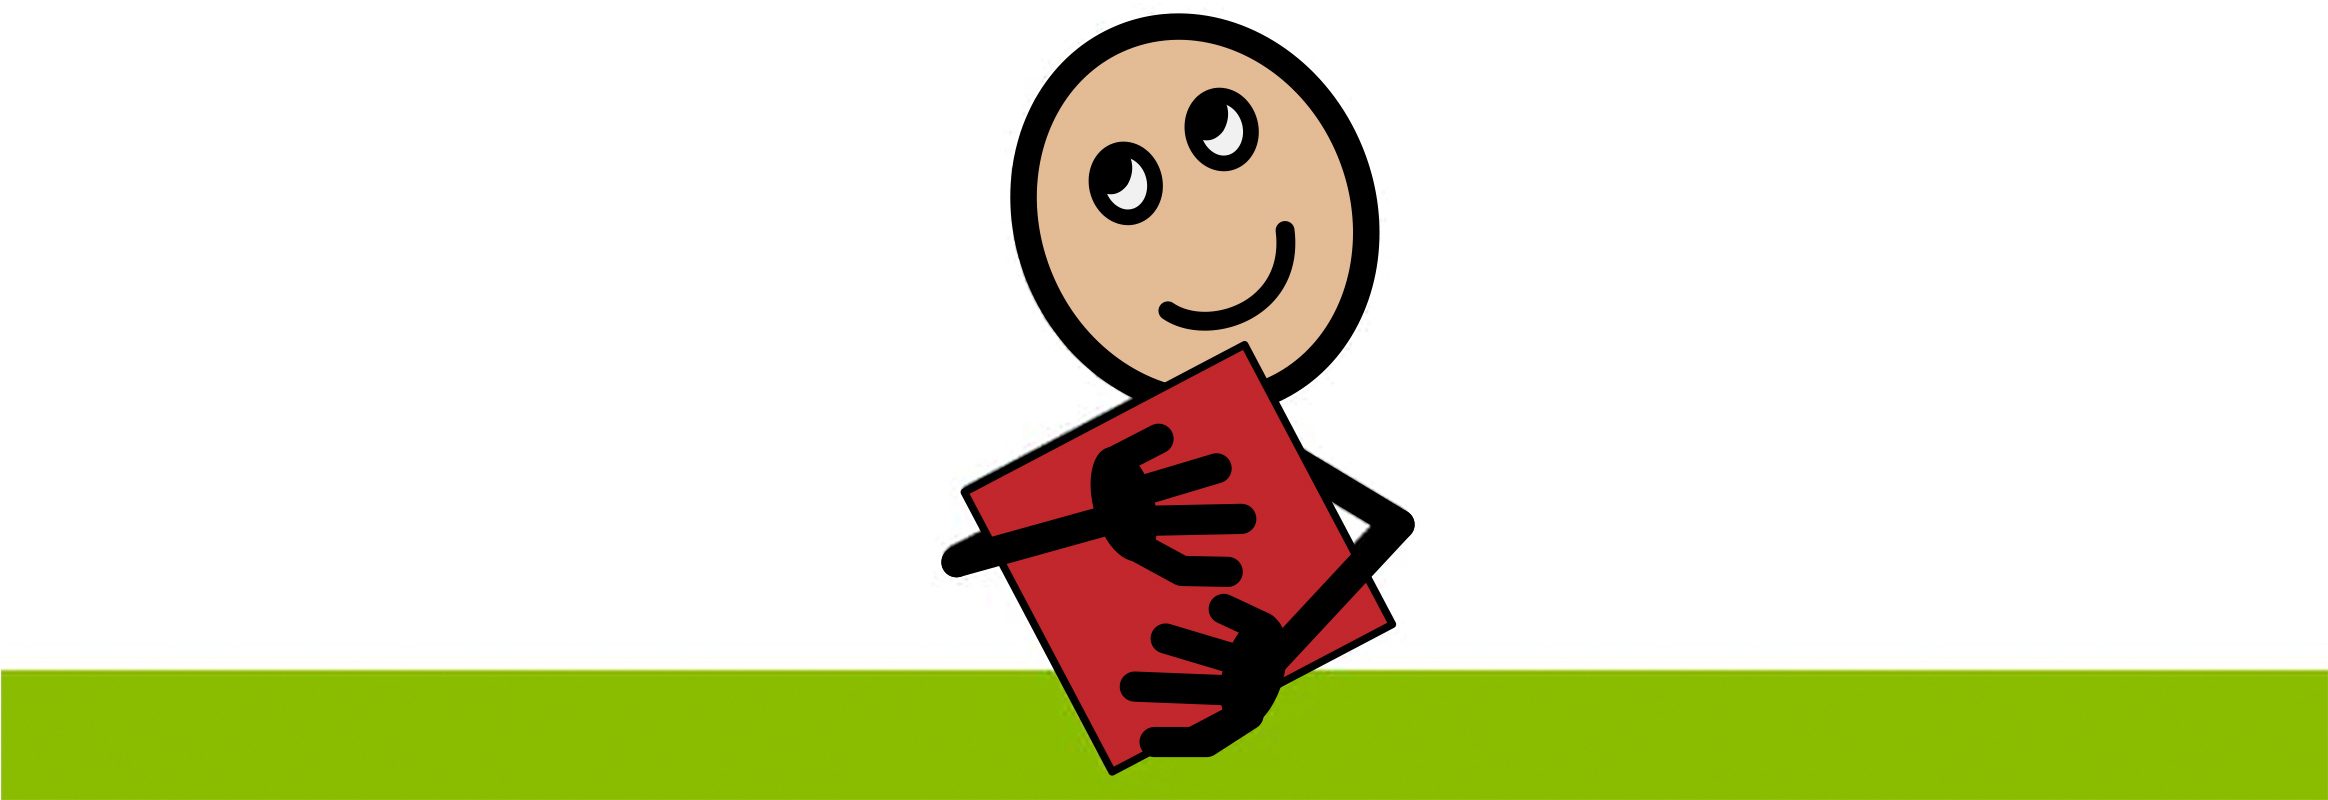 Animated Child holding a book